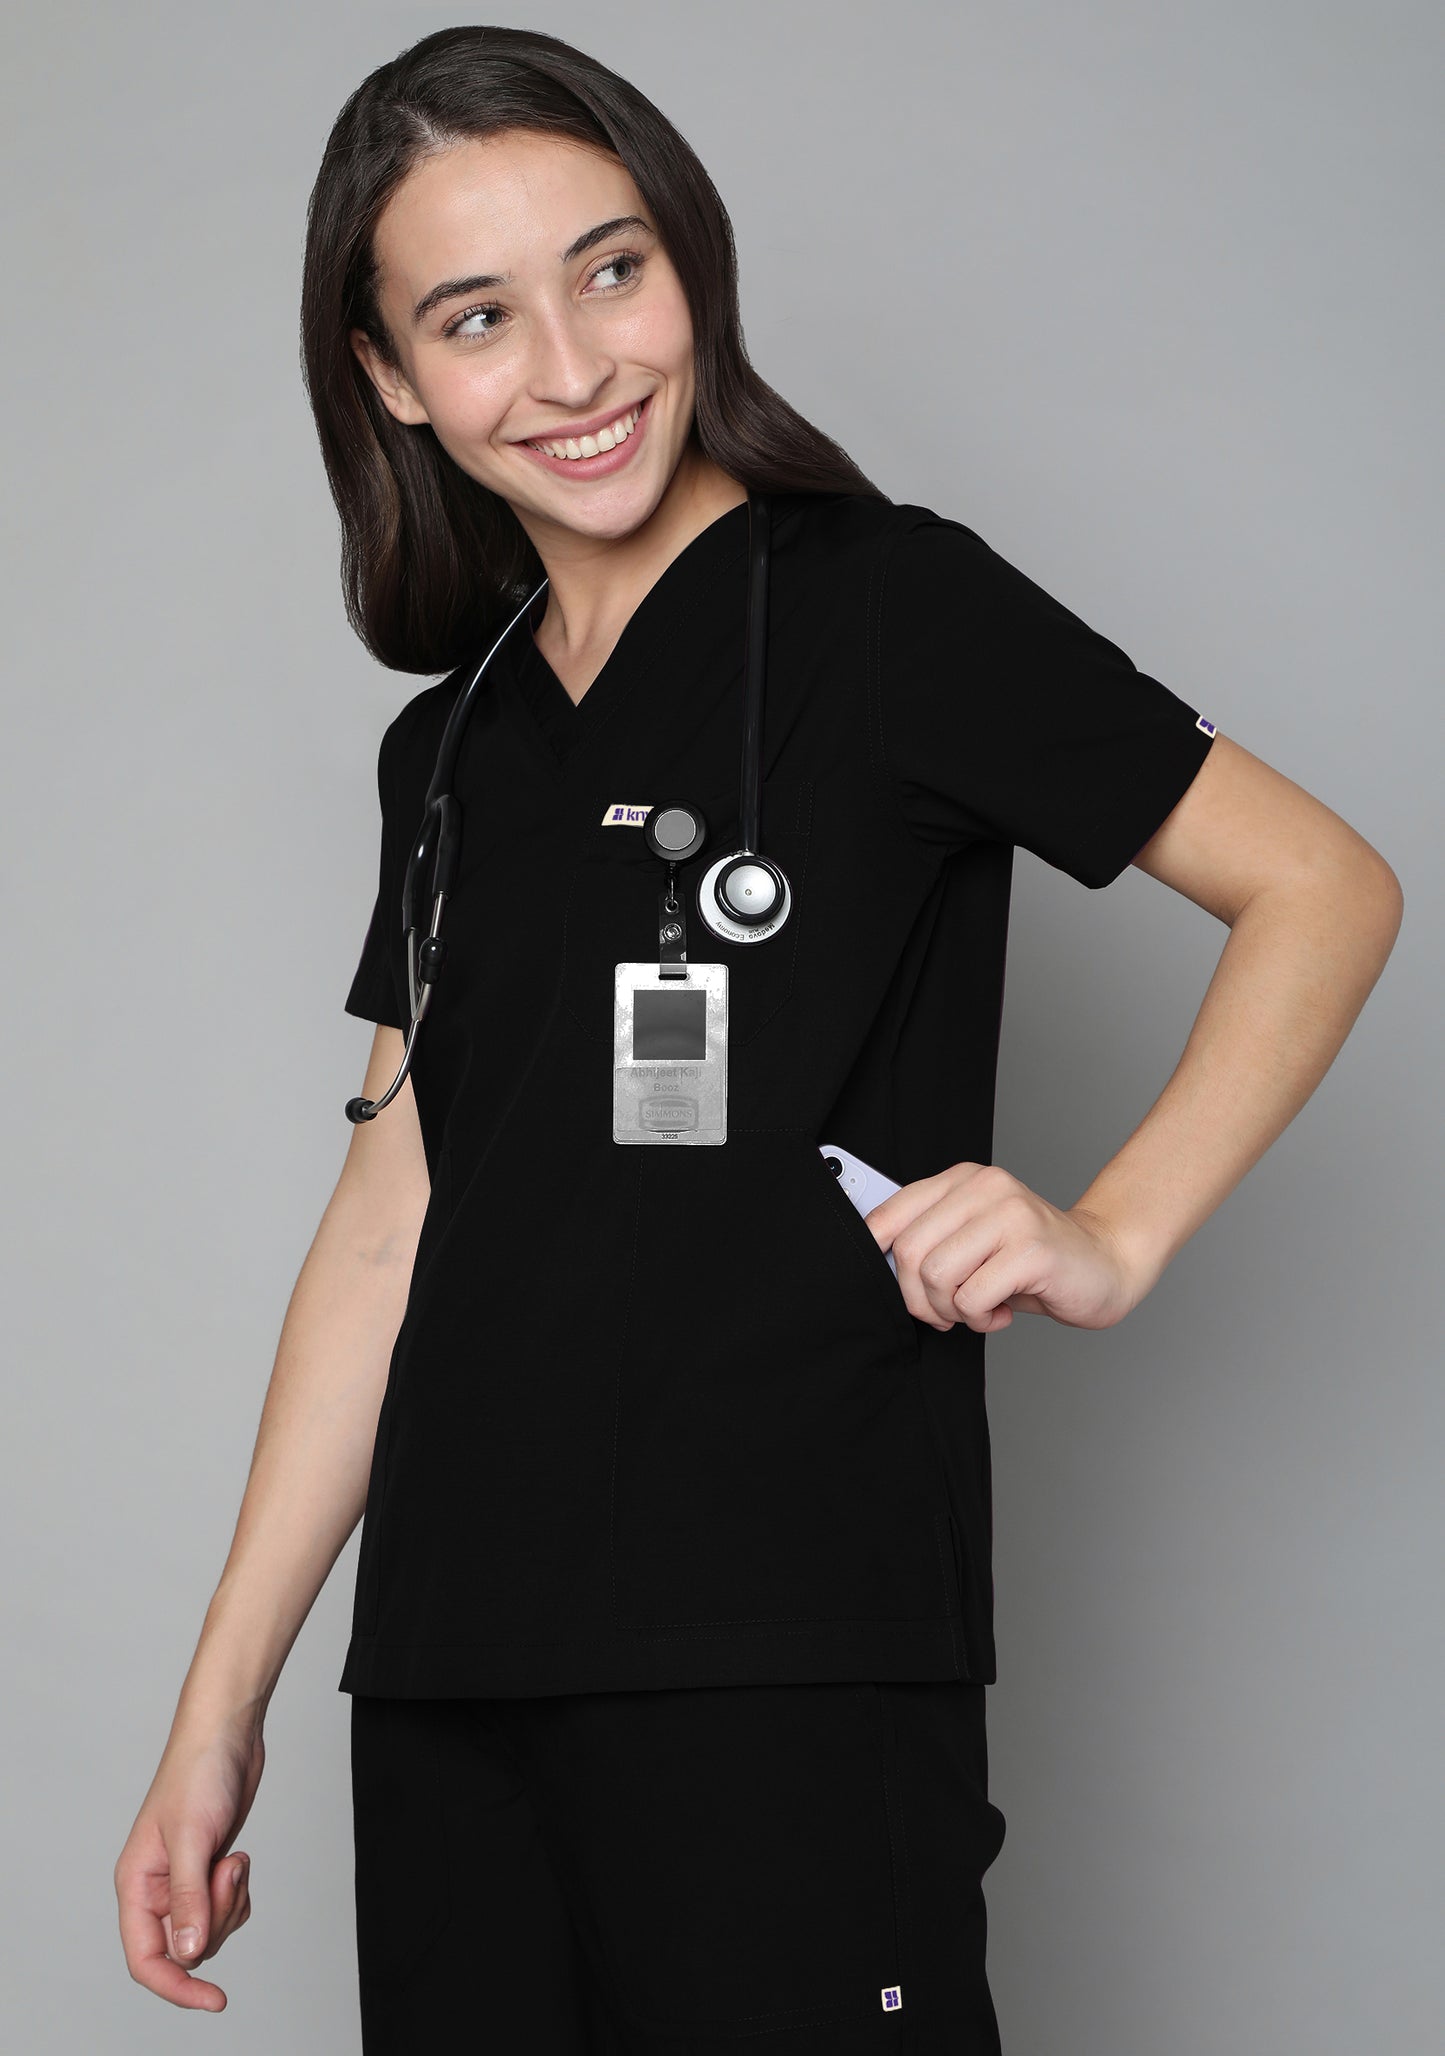 Ditch Generic! Get your own customised OT scrubs that reflect YOU. – Knya